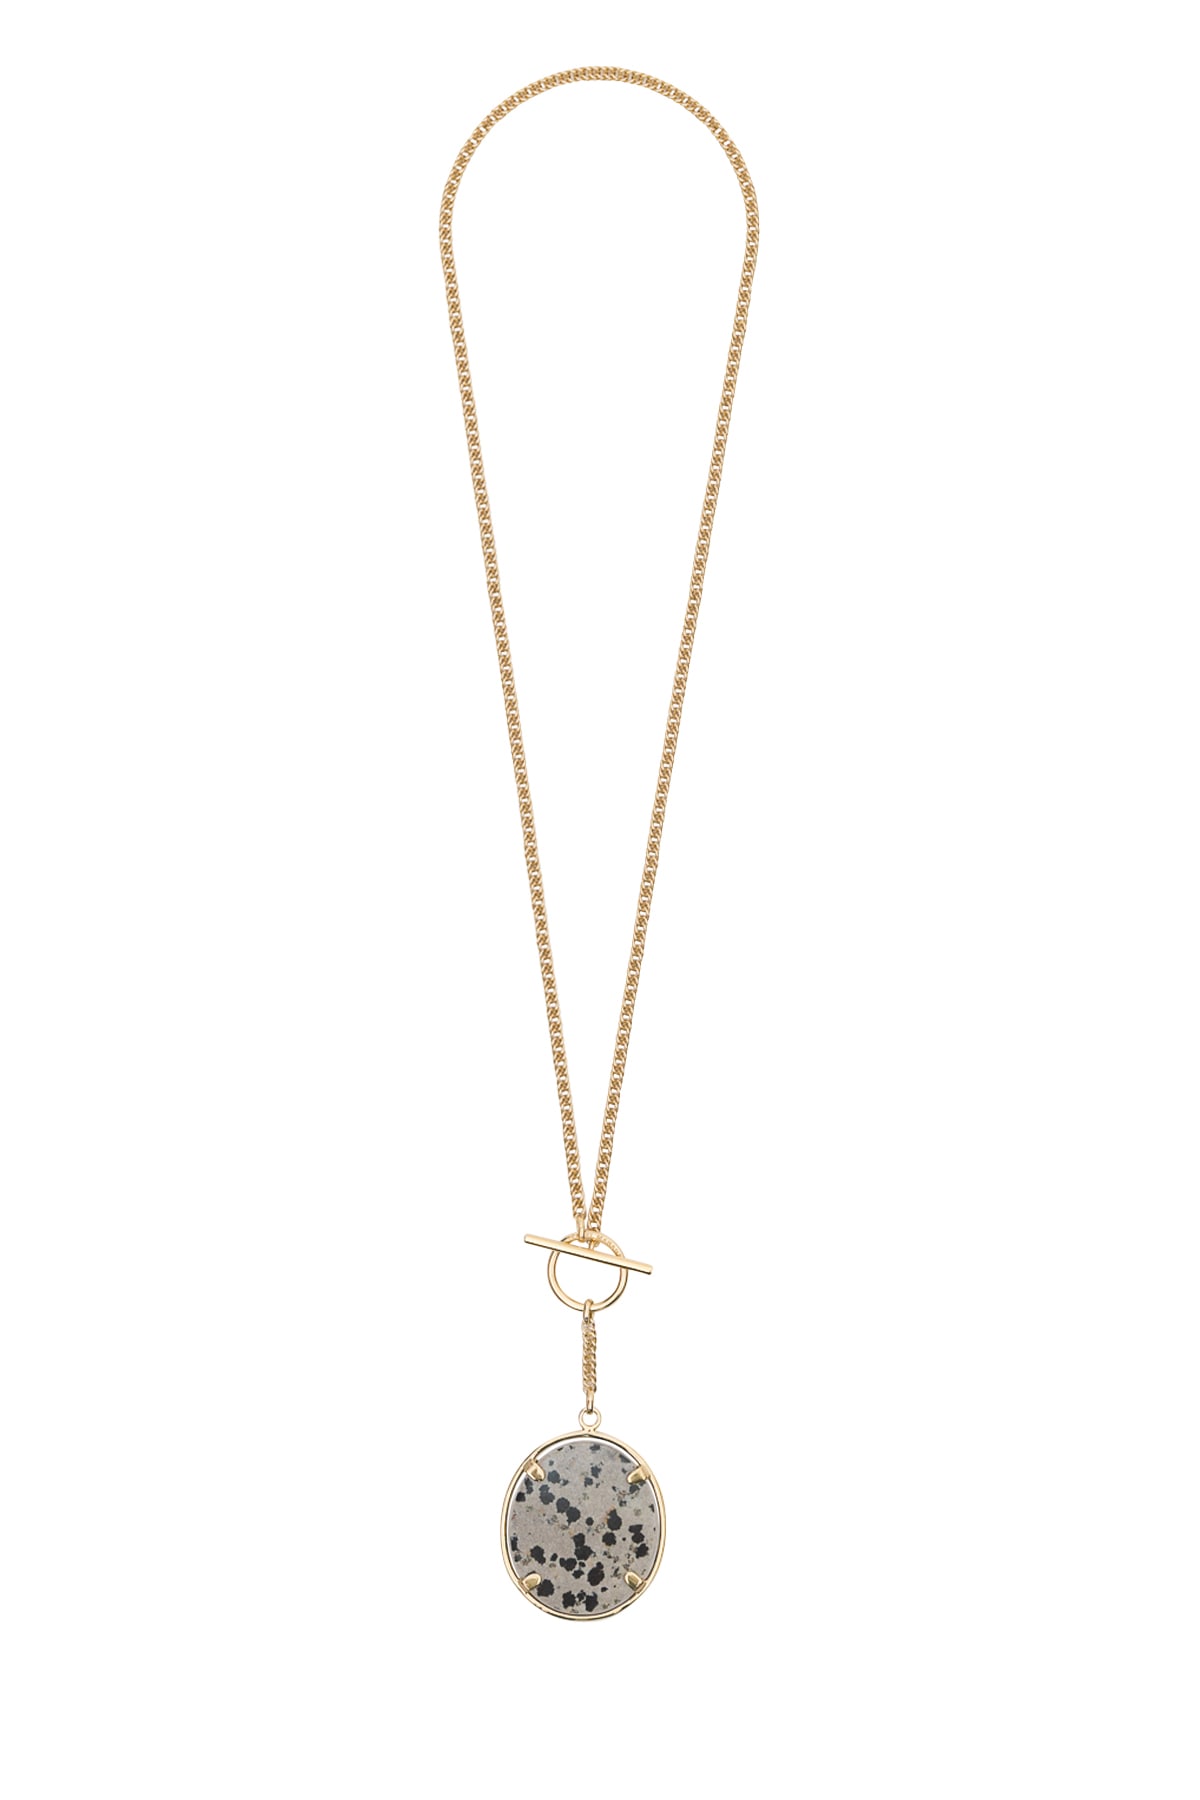 ISABEL MARANT NECKLACE WITH STONE,11317472